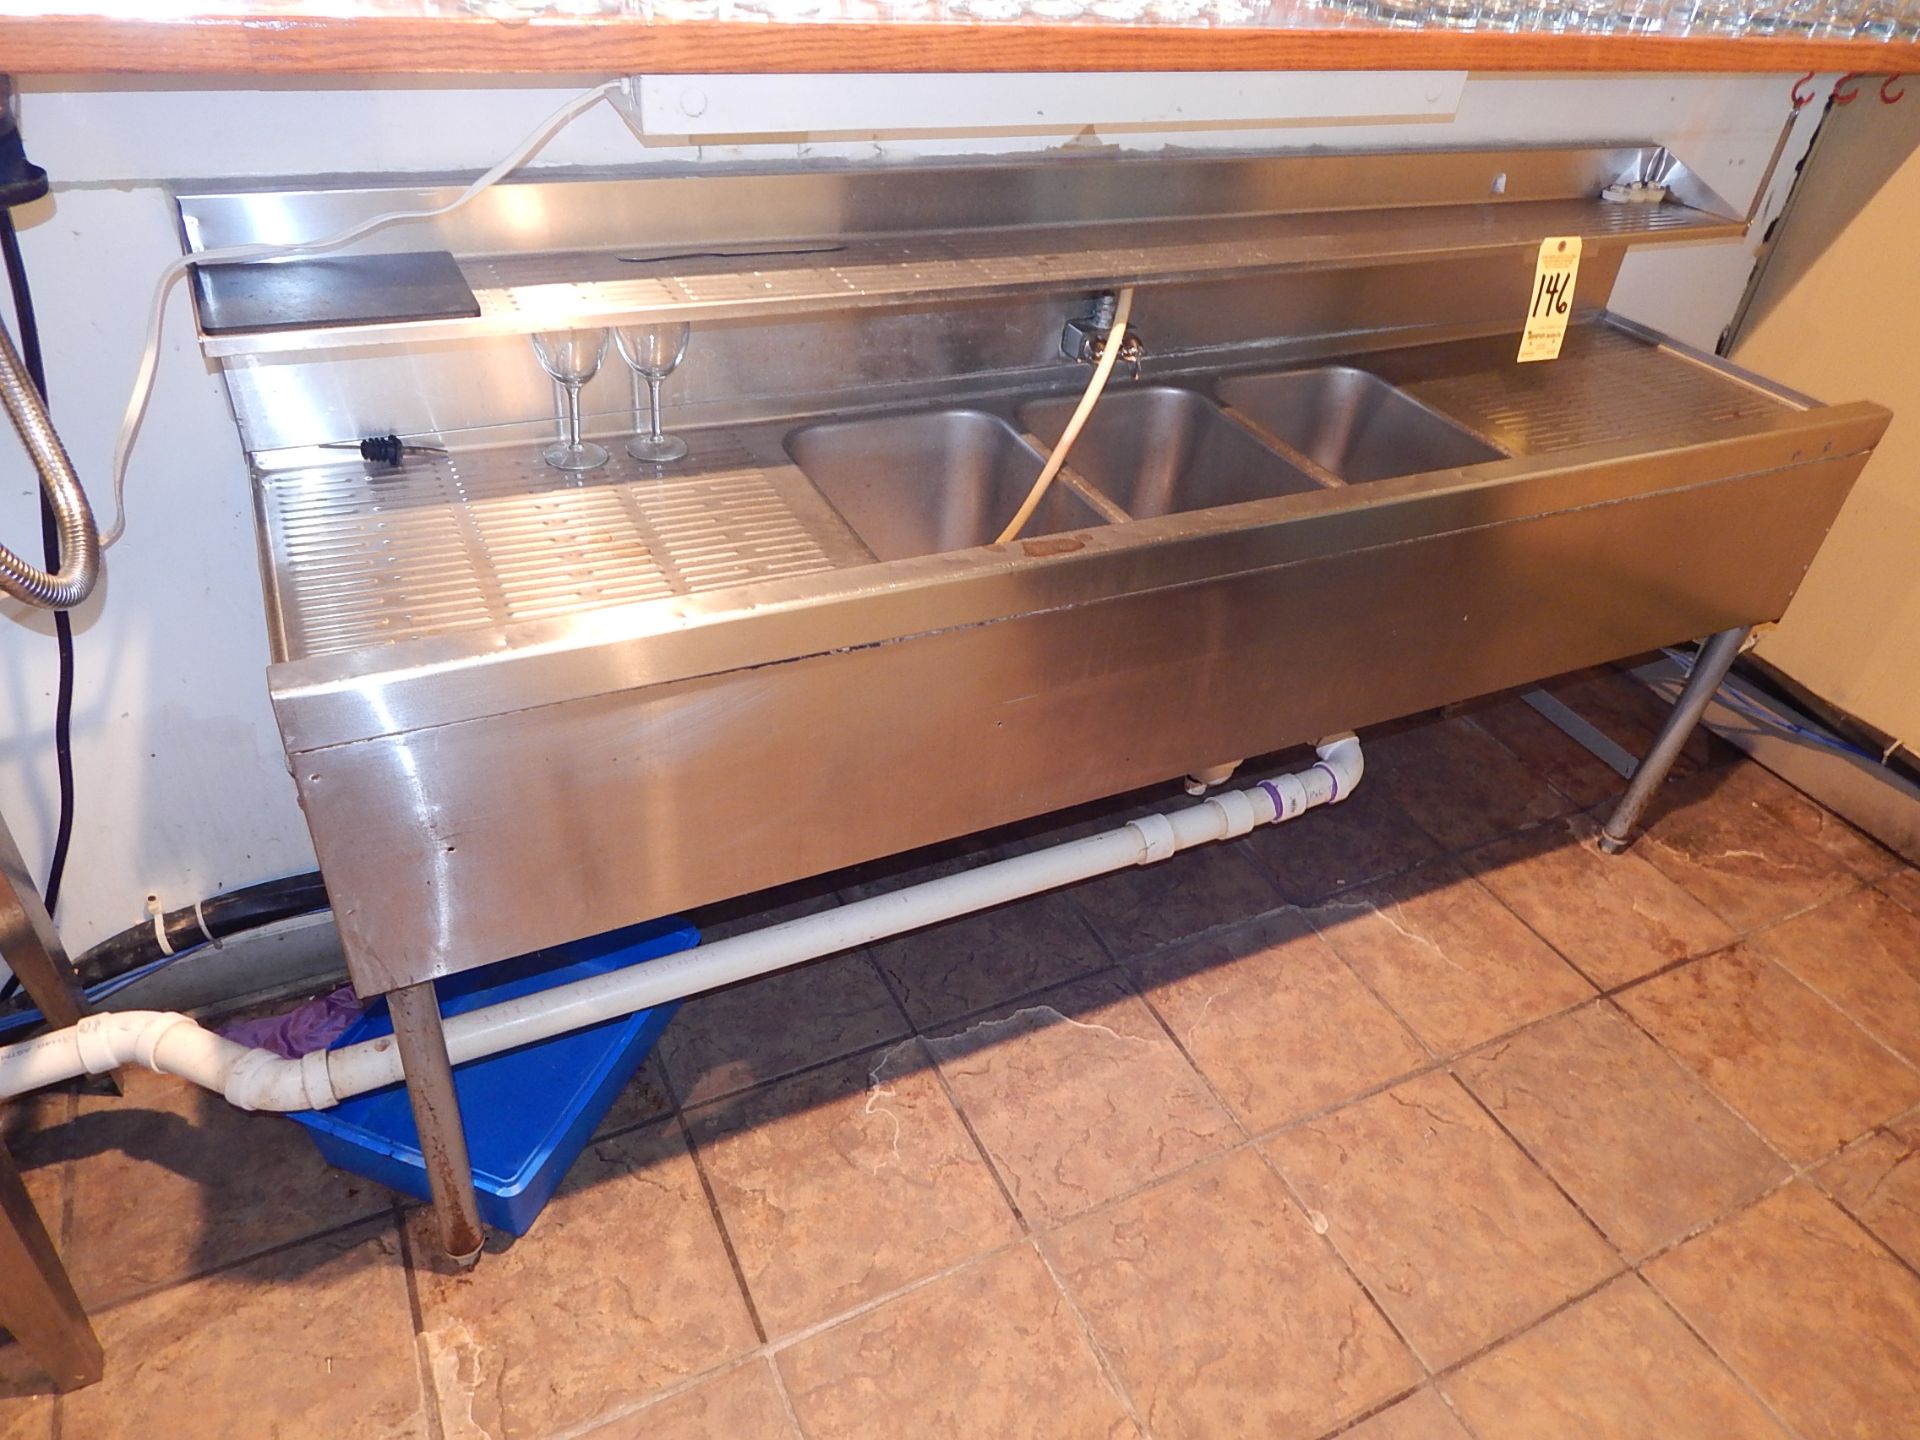 3-Bay Stainless Steel Sink with Drain Boards and Glass Rack